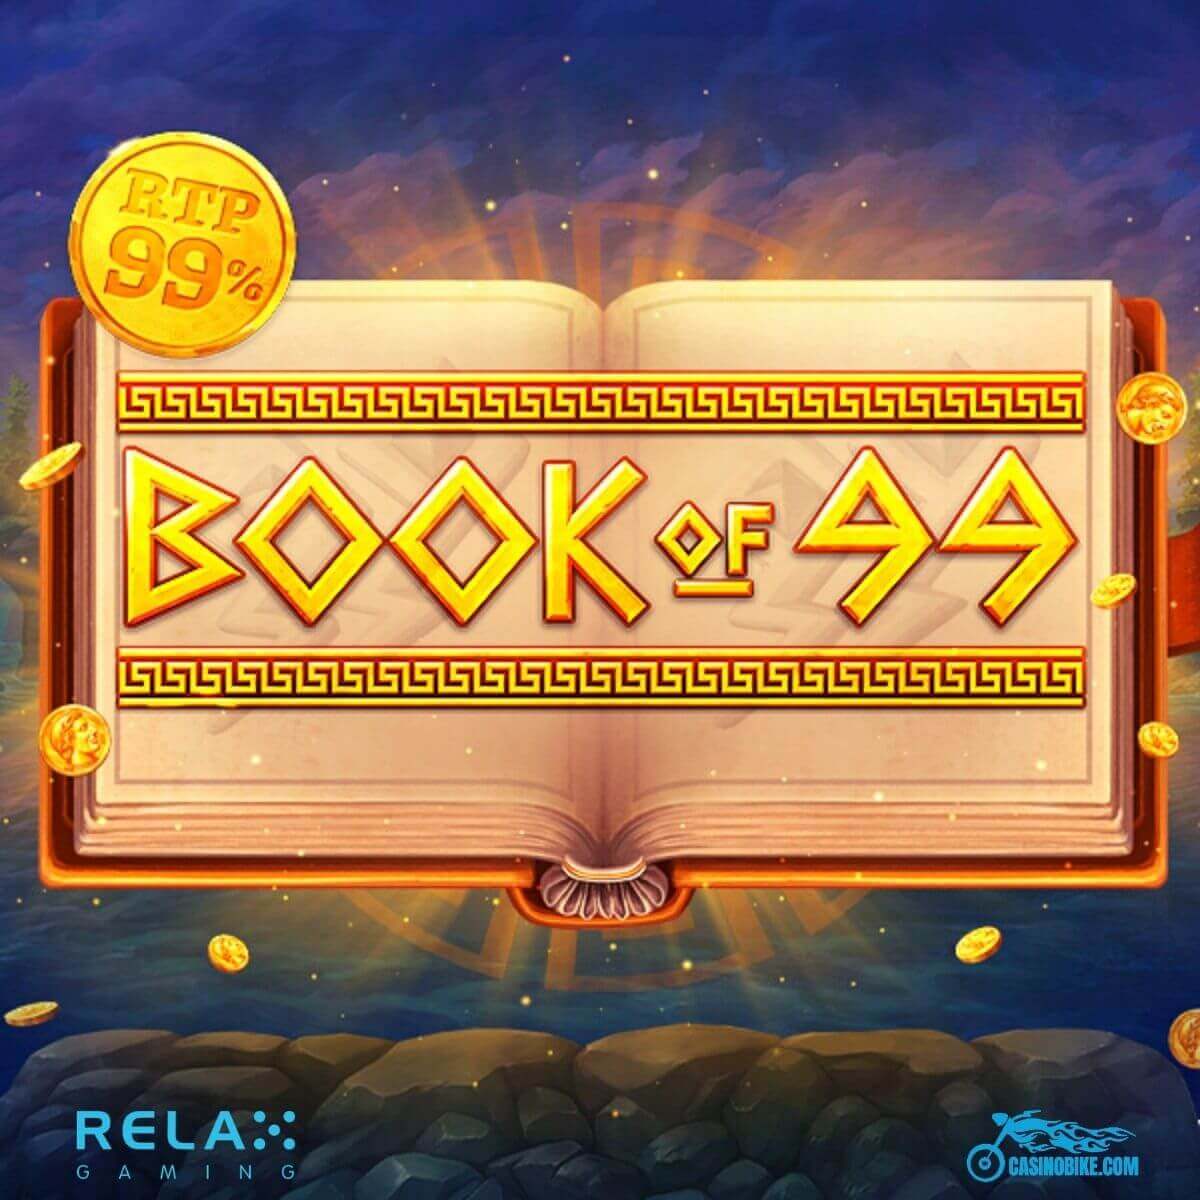 Book of 99 Online Slot from Relax Gaming